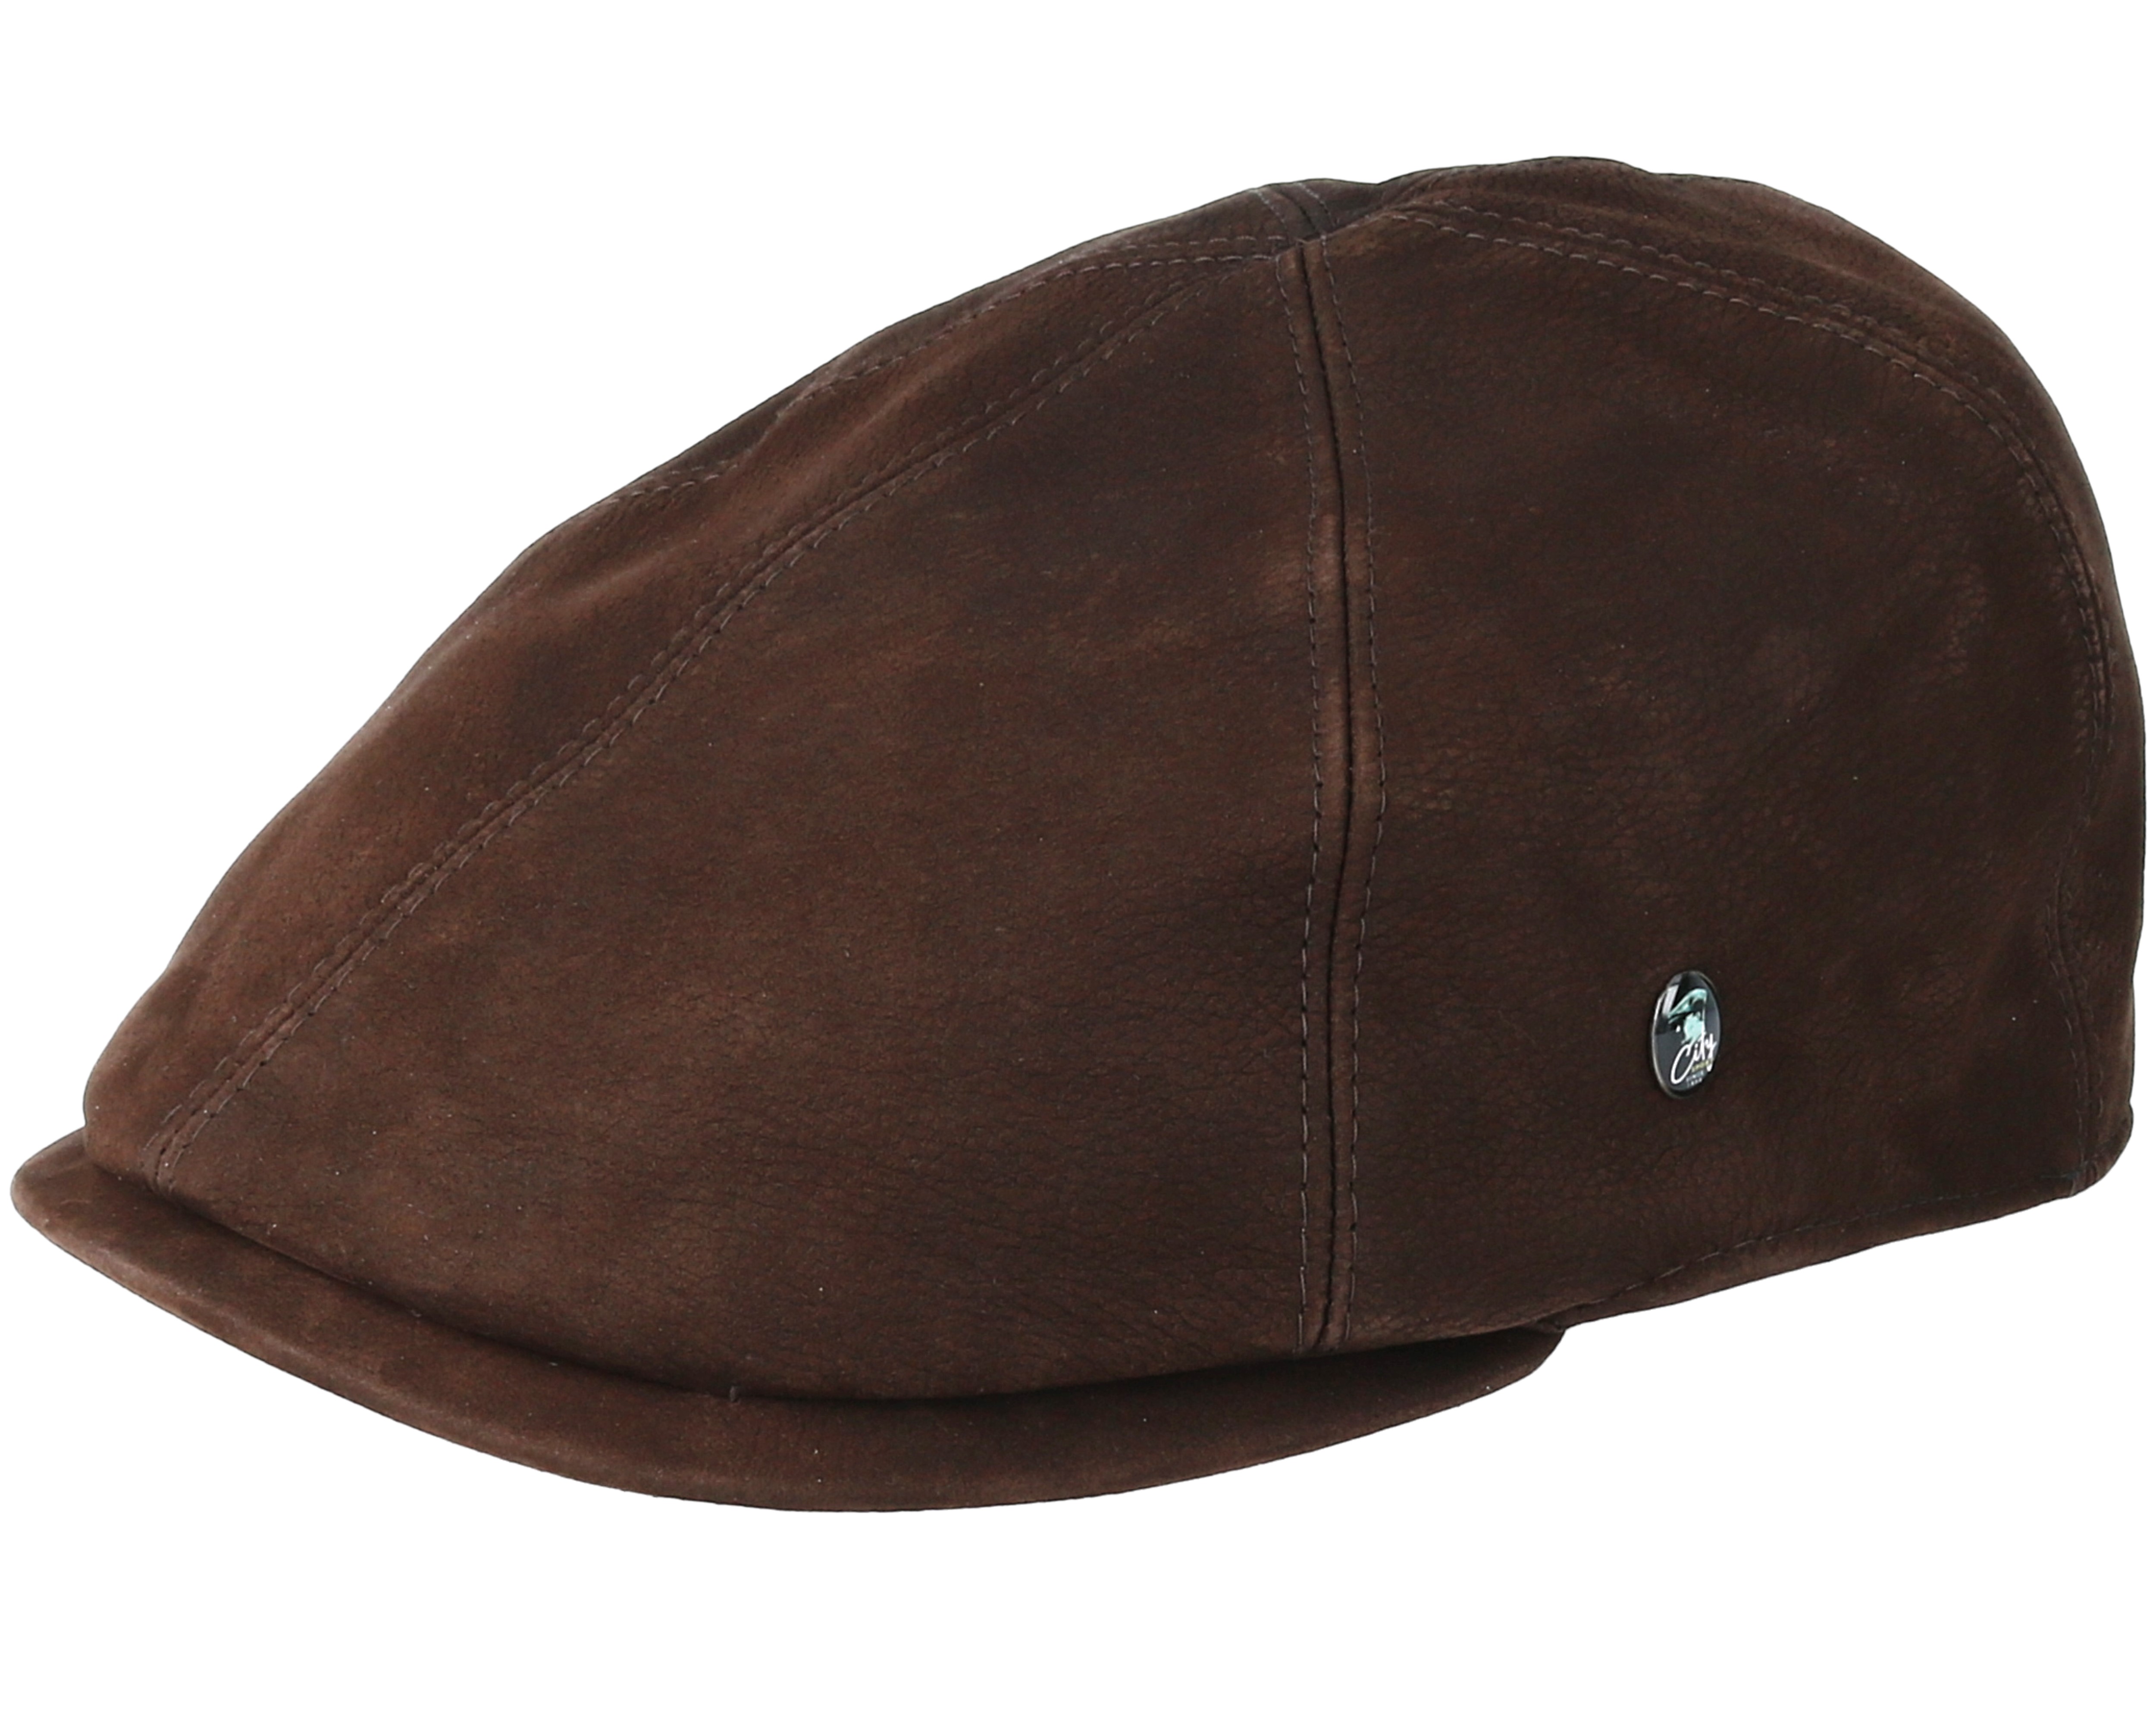 Leather Sixpence Brown Flat Cap - City Sport caps - Hatstore.no